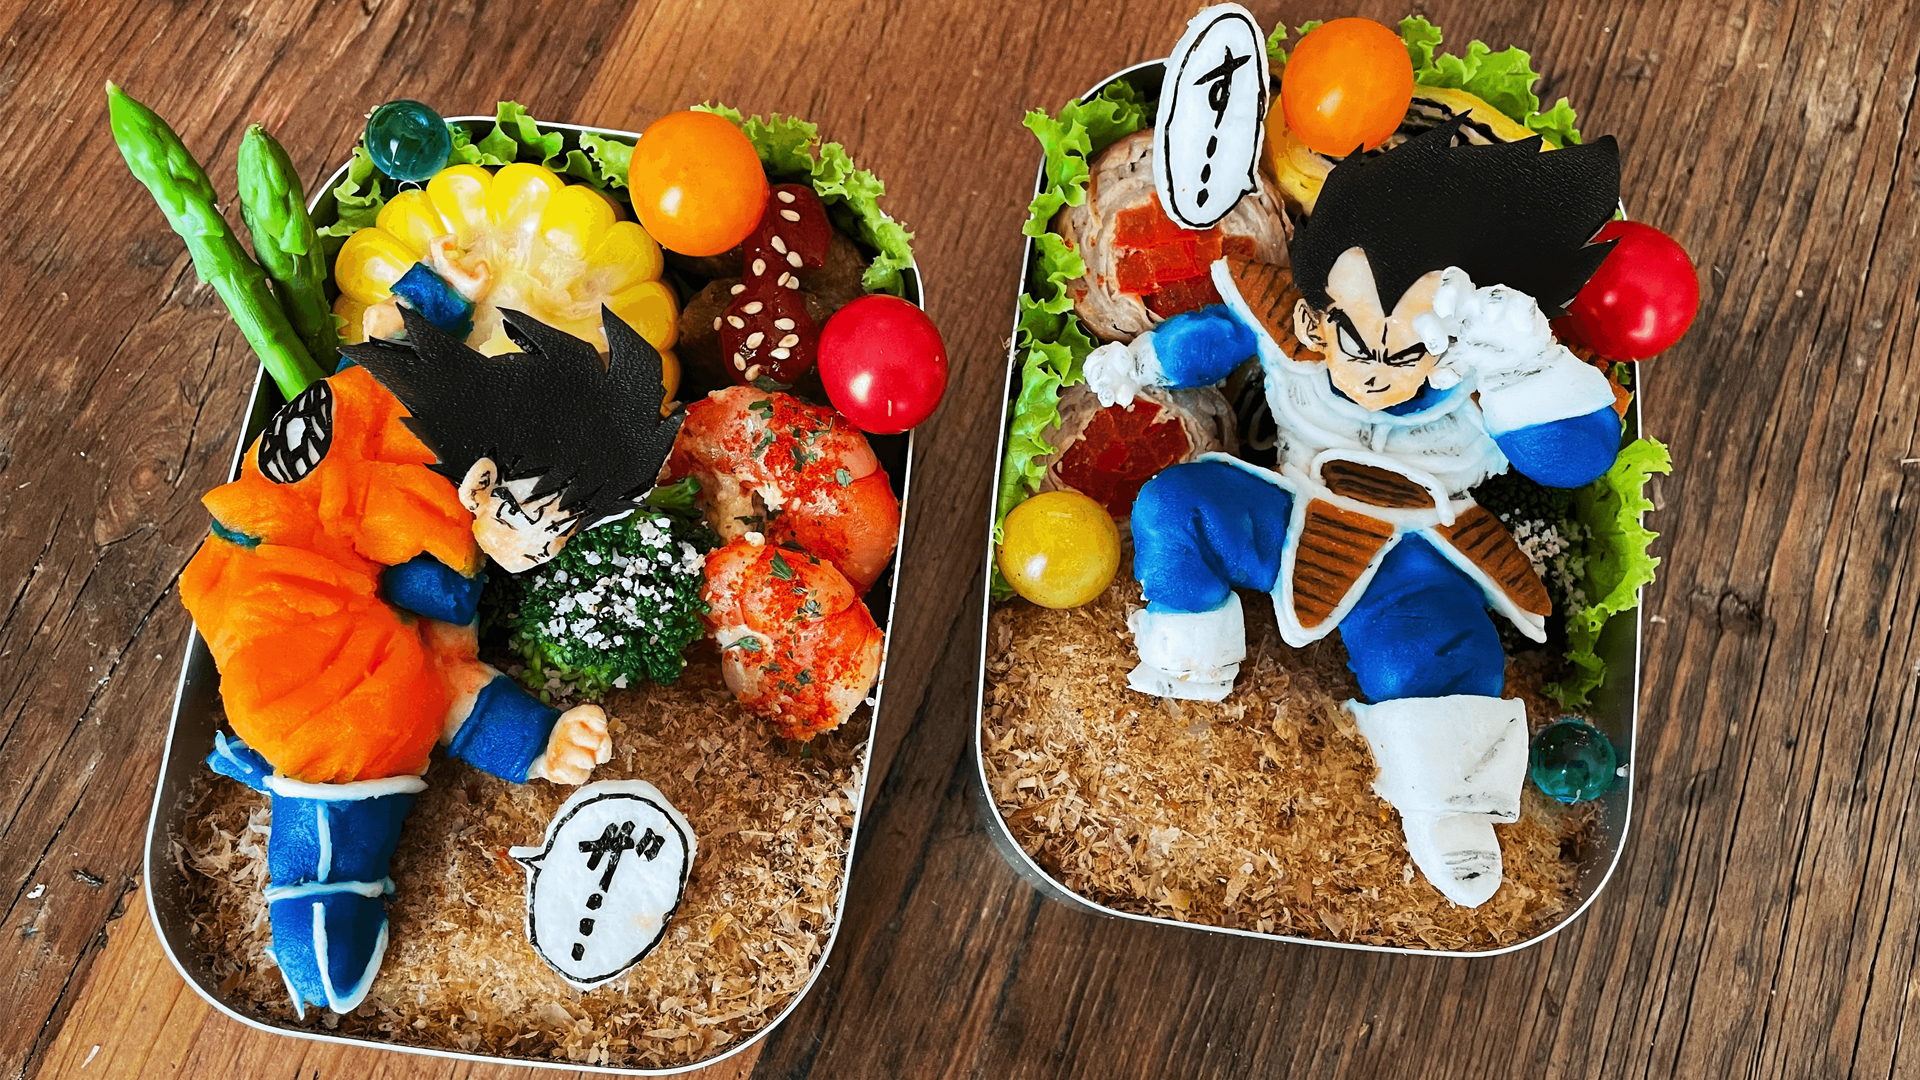 New to the world of bento, here are my first few since getting a